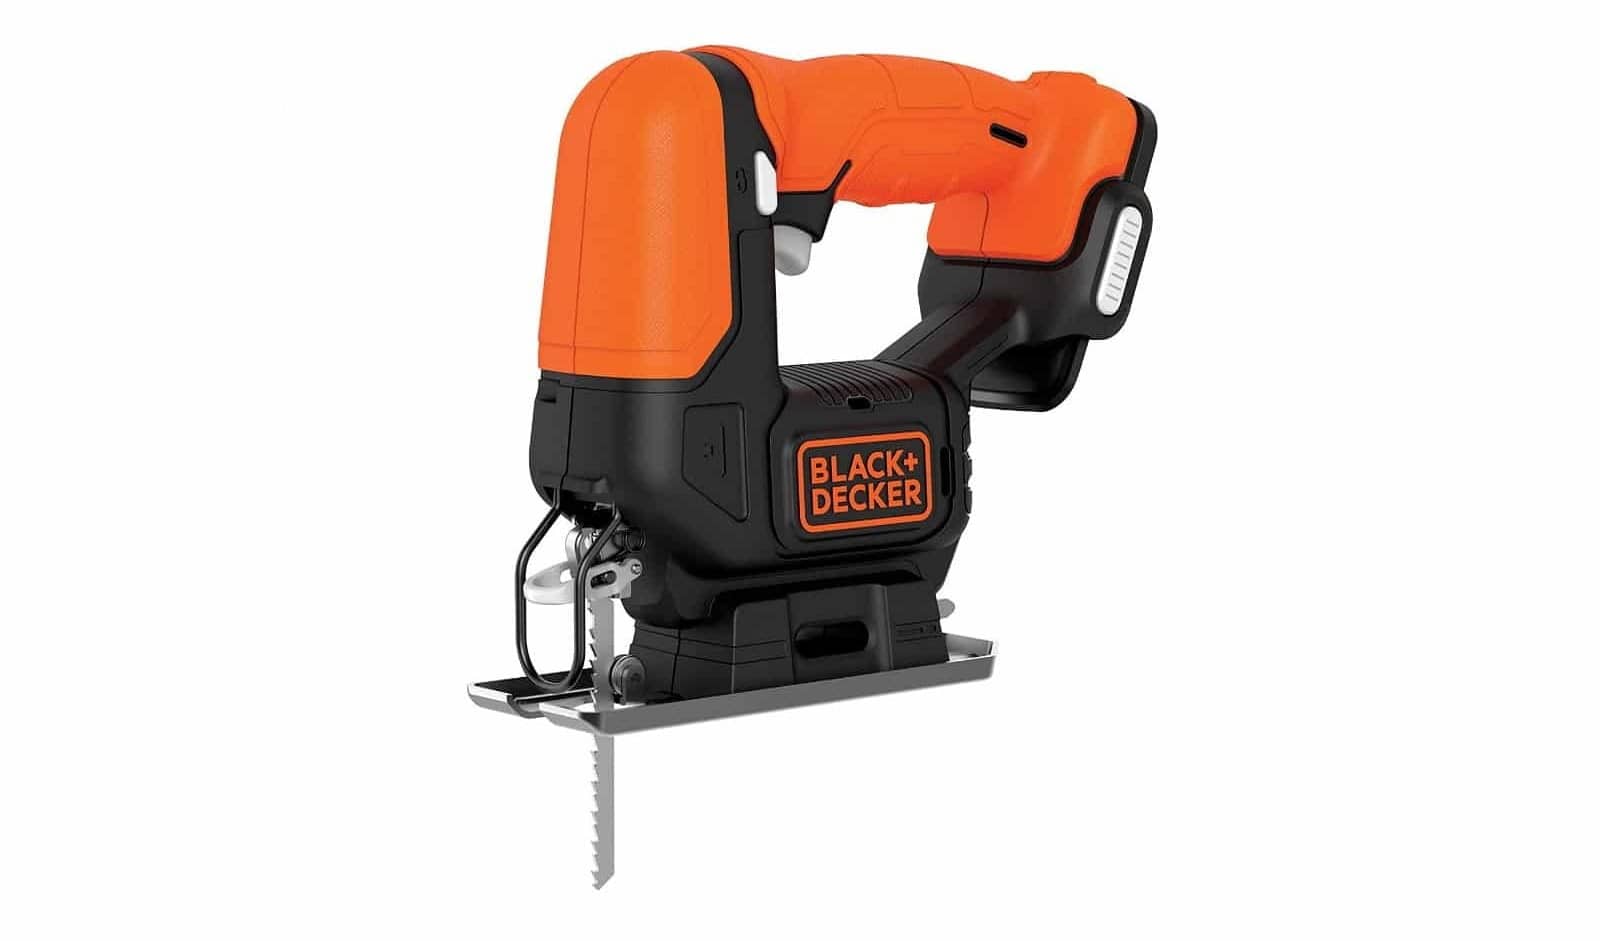 Black and Decker BDCJS12 12v Cordless Jigsaw Bare unit - No Battery or Charger